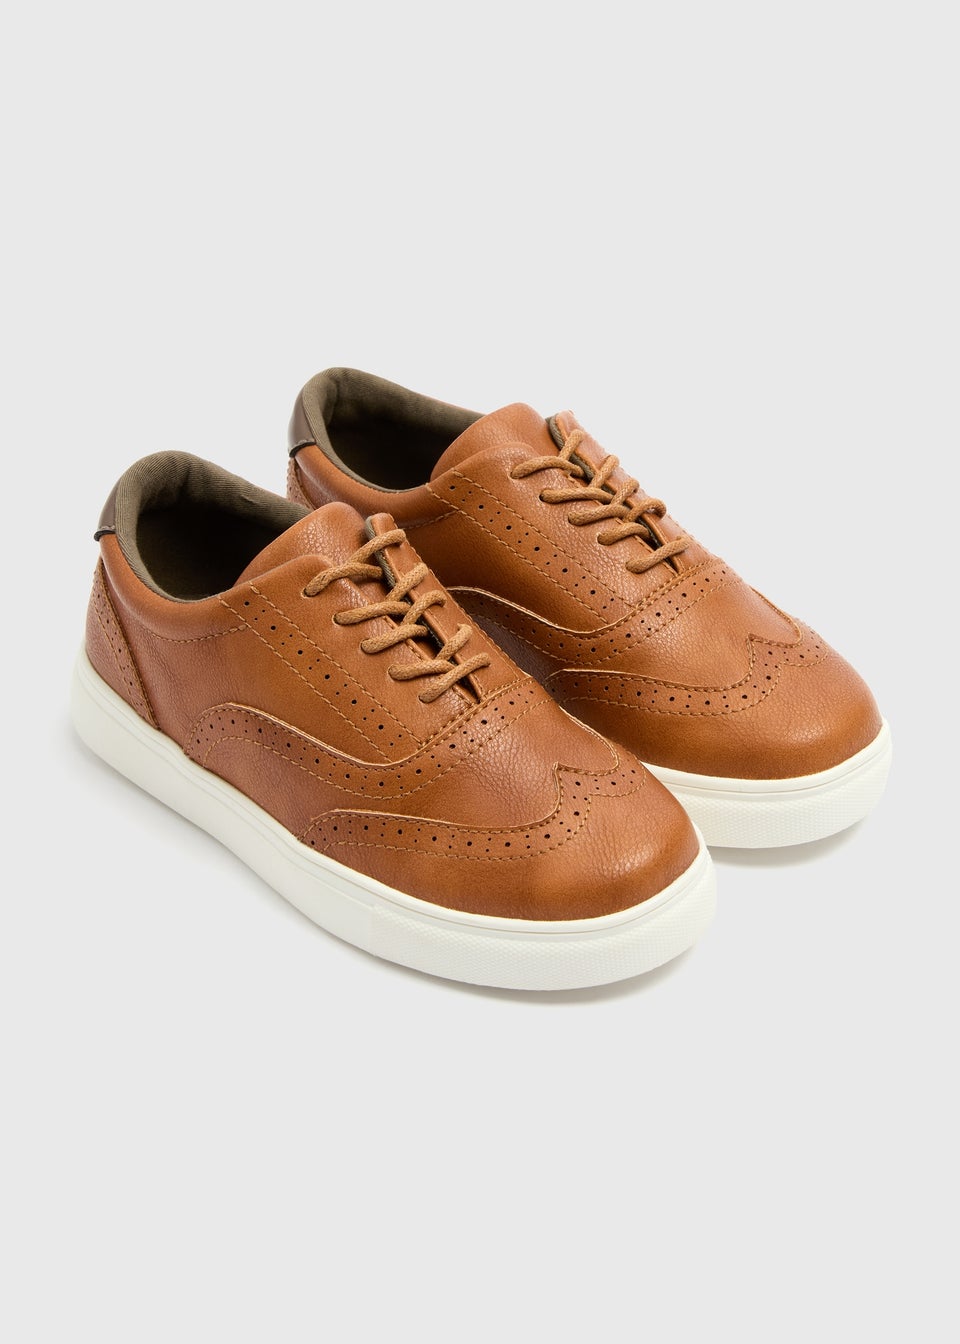 Boys Tan PU Casual Brogue Shoes (Younger 10-Older 6)